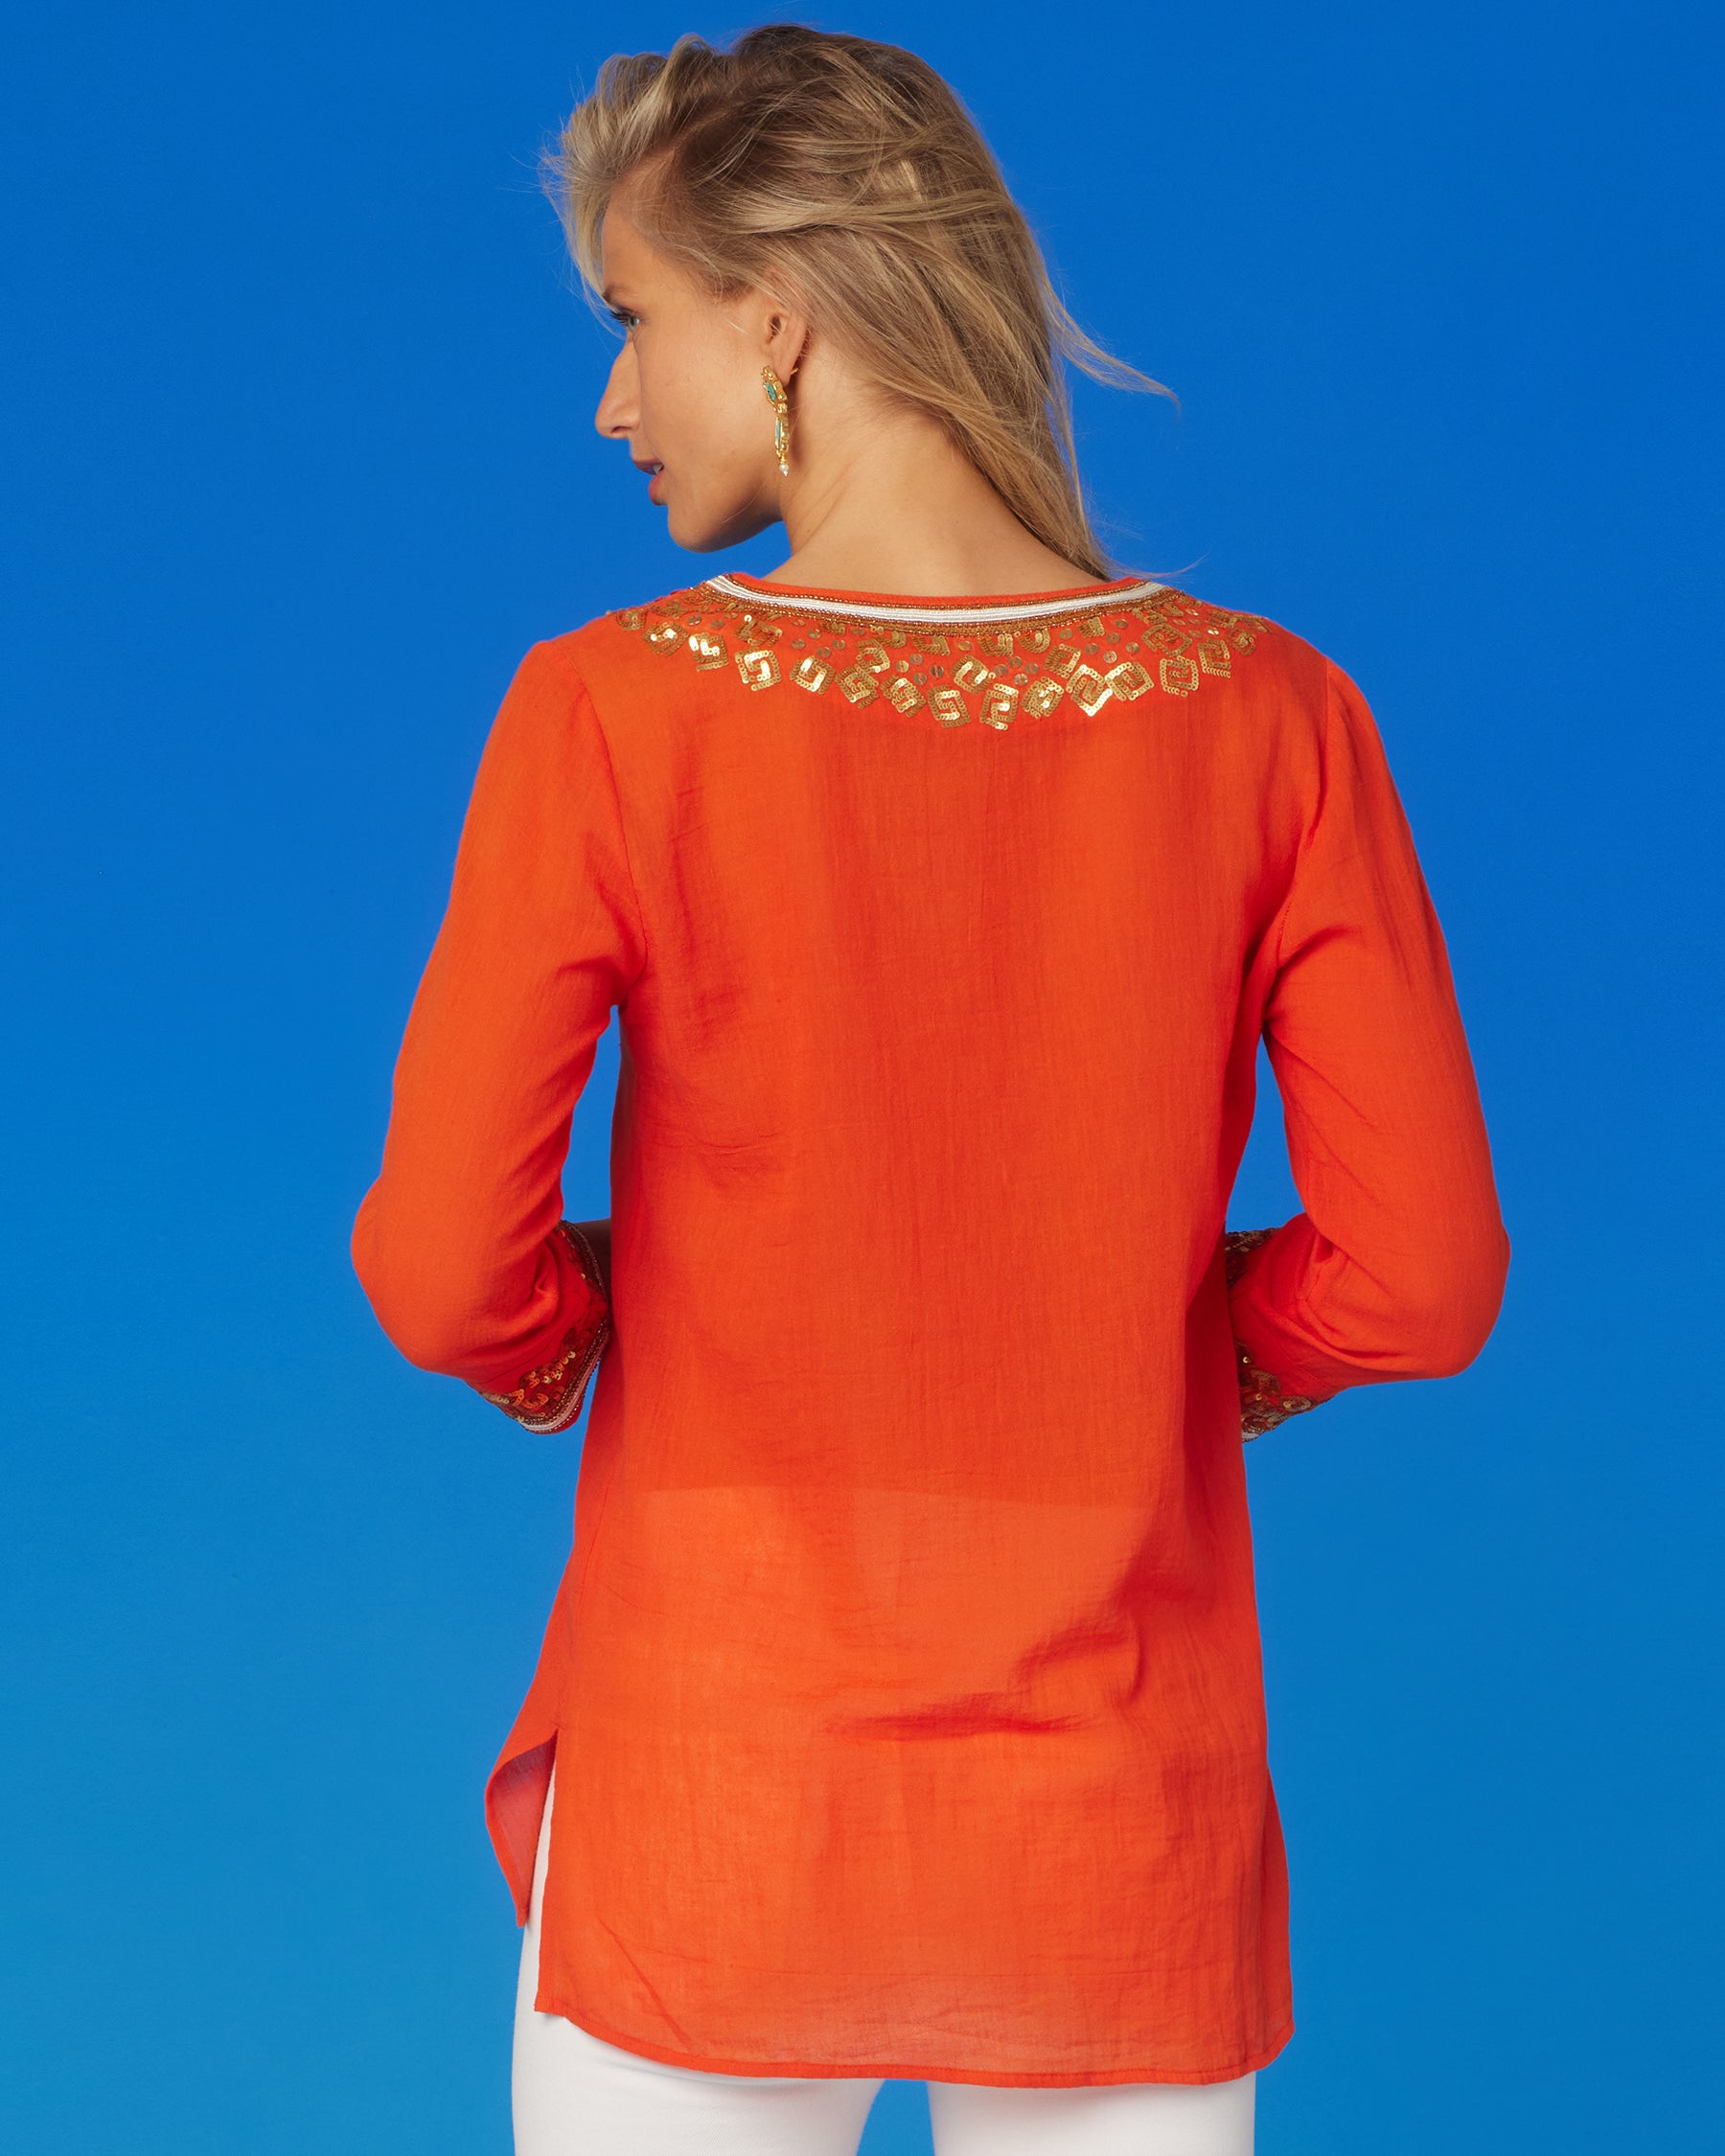 Alba Cover-Up Tunic in Coral Orange and Embellishment-Back View